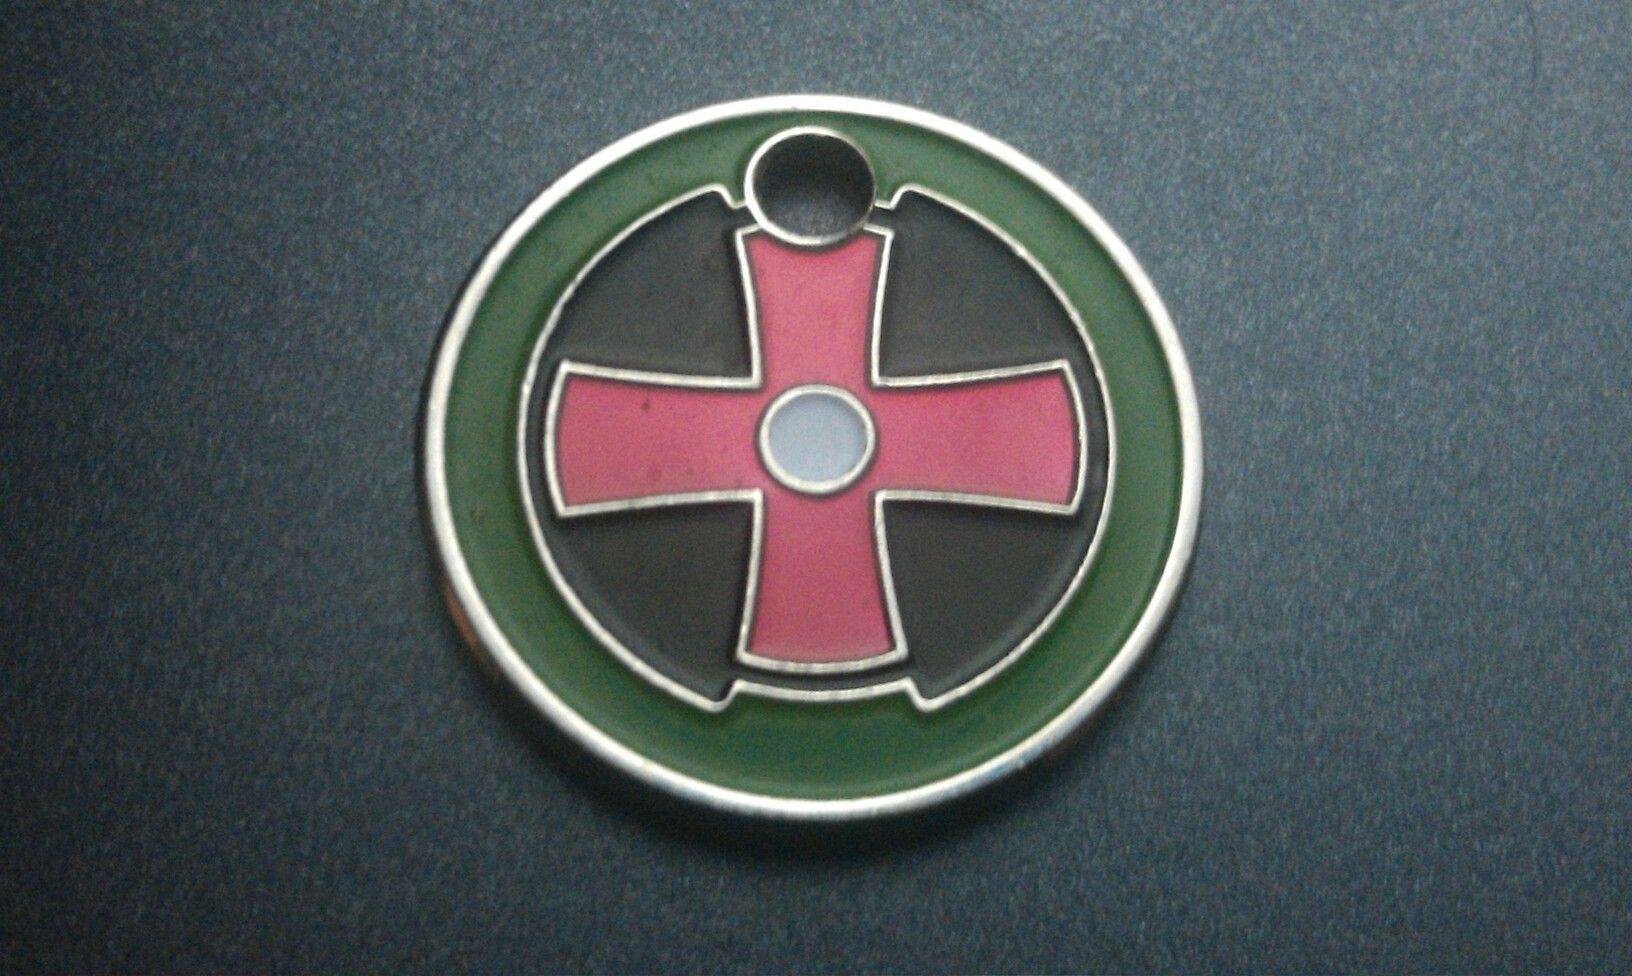 Red Circle with White N Logo - My Circle Pendant based on my favorite series by Ted Dekker. Black